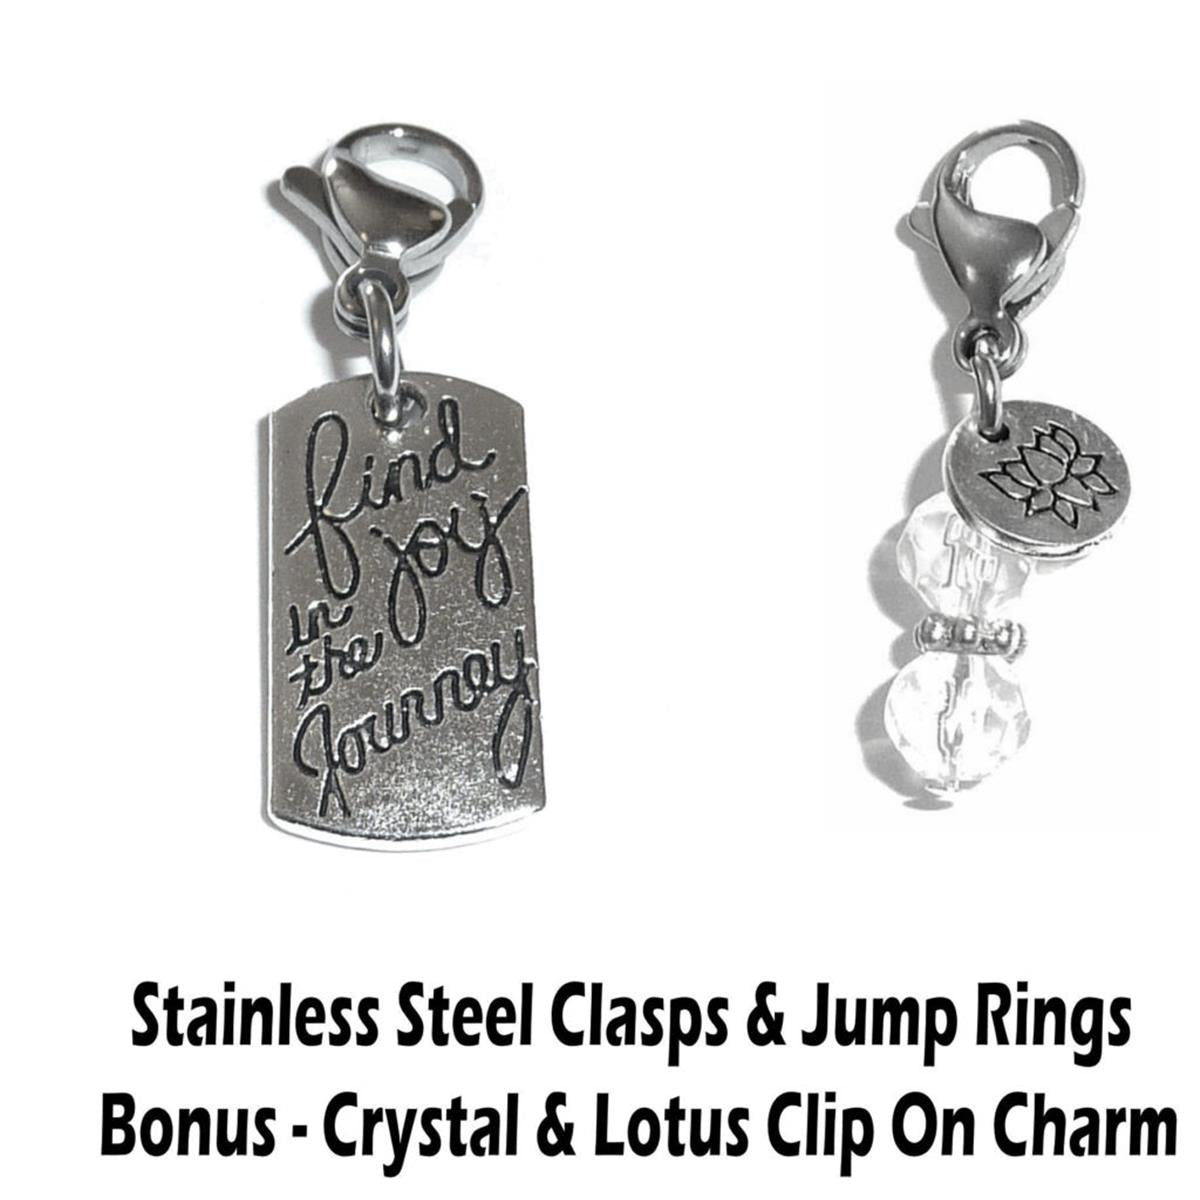 Find Joy In The Journey Clip On Charms - Inspirational Charms Clip On Anywhere